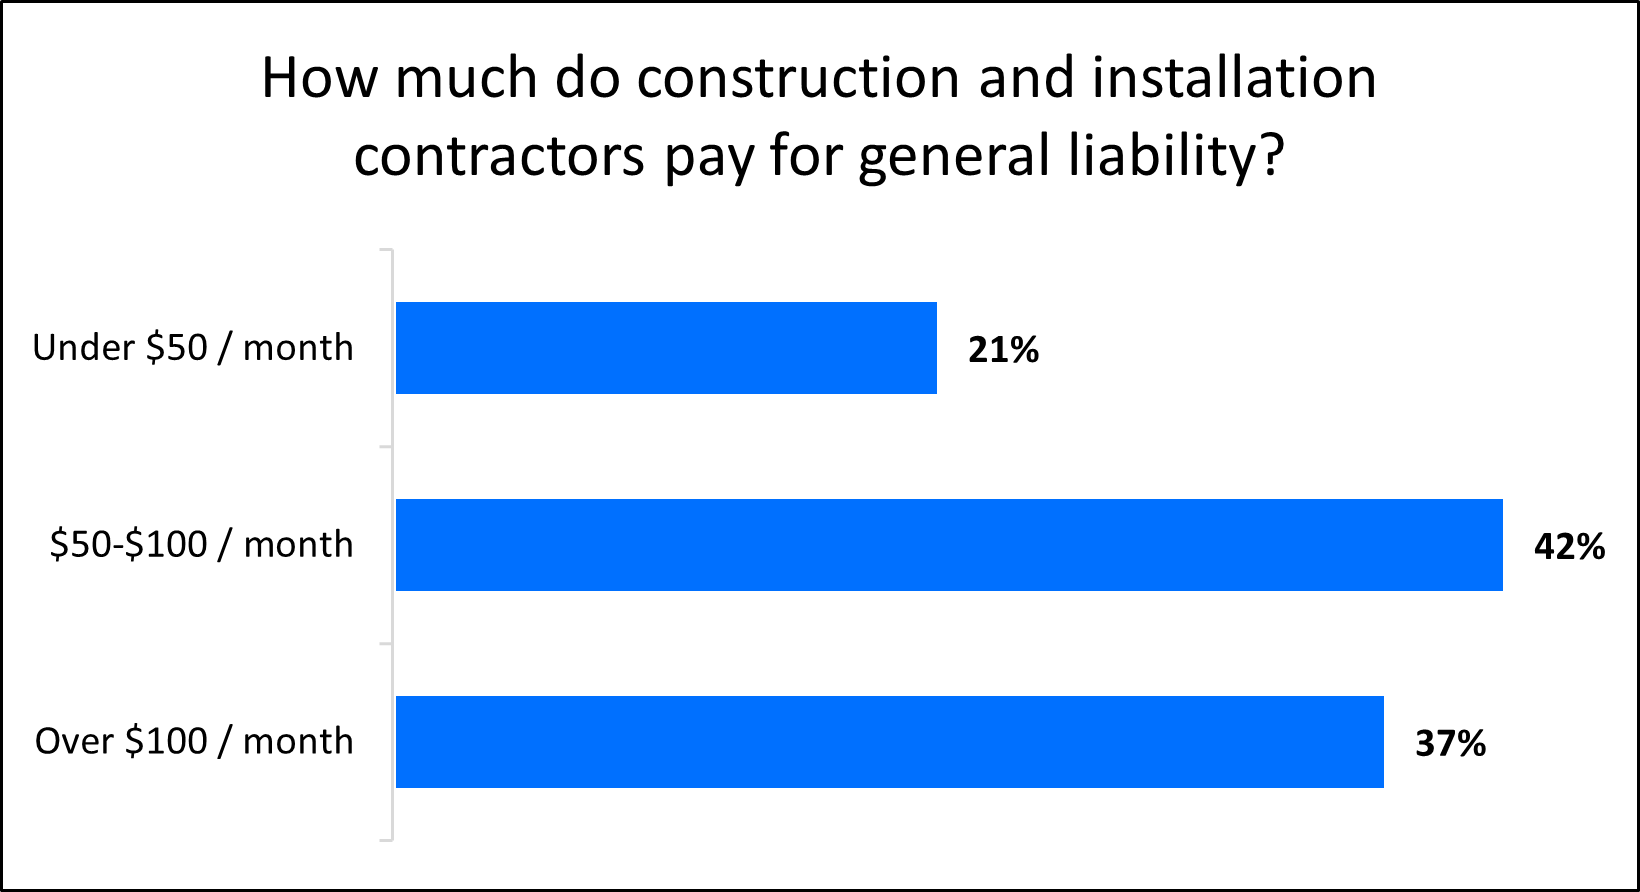 How much do construction and installation contractors pay for general liability?